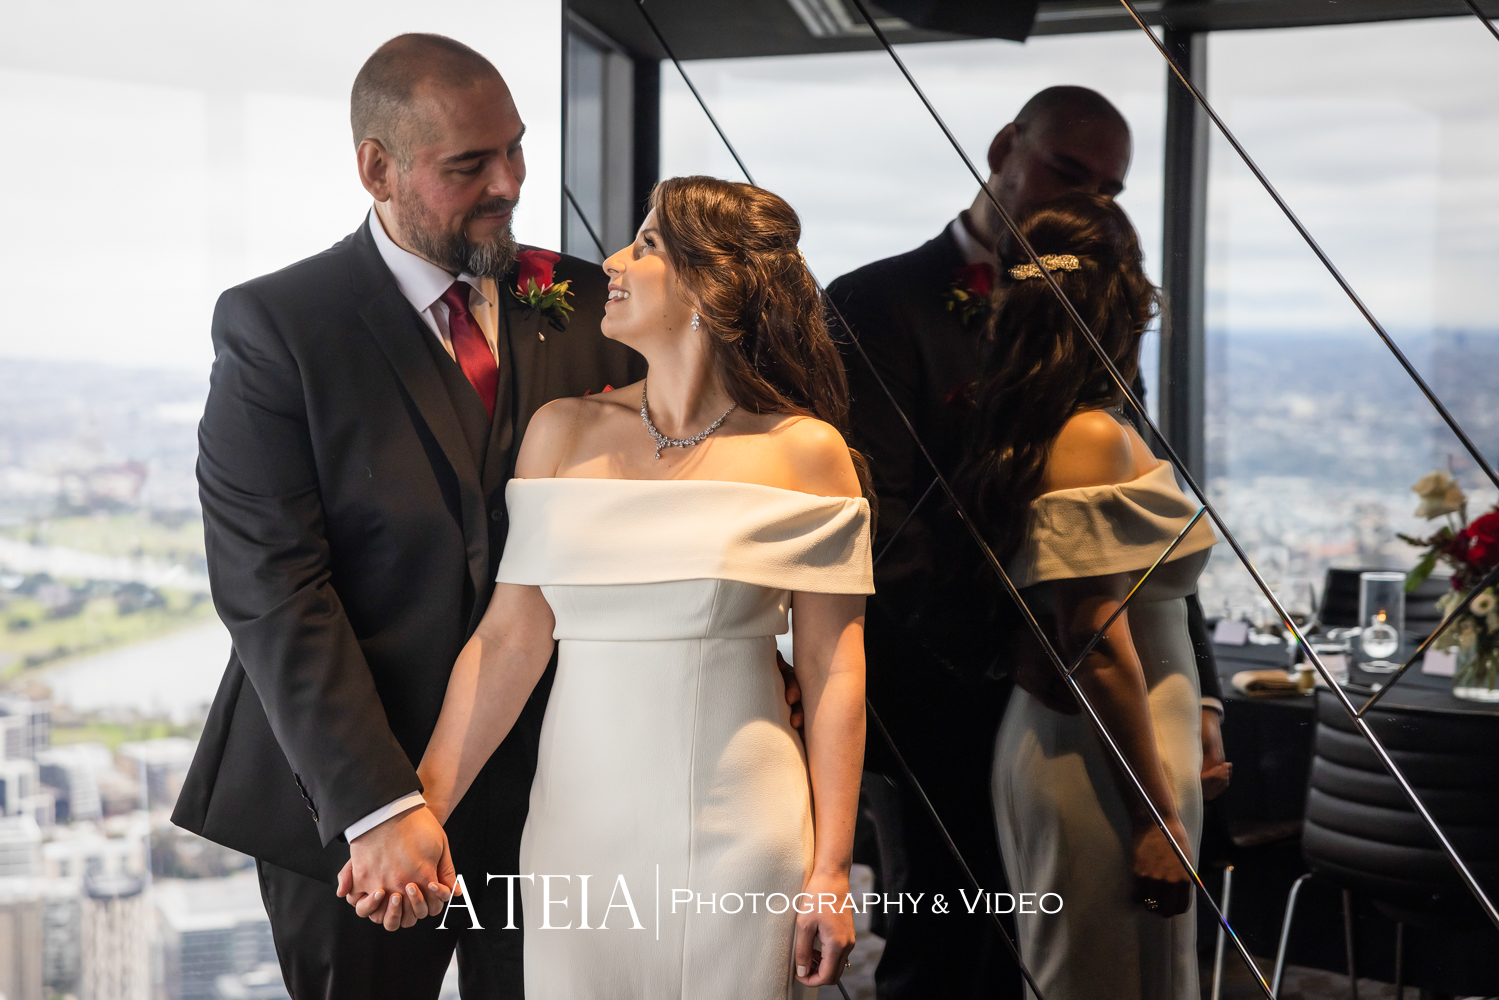 , Eren and Julio&#8217;s wedding photography at Eureka Skydeck 89 captured by ATEIA Photography &#038; Video